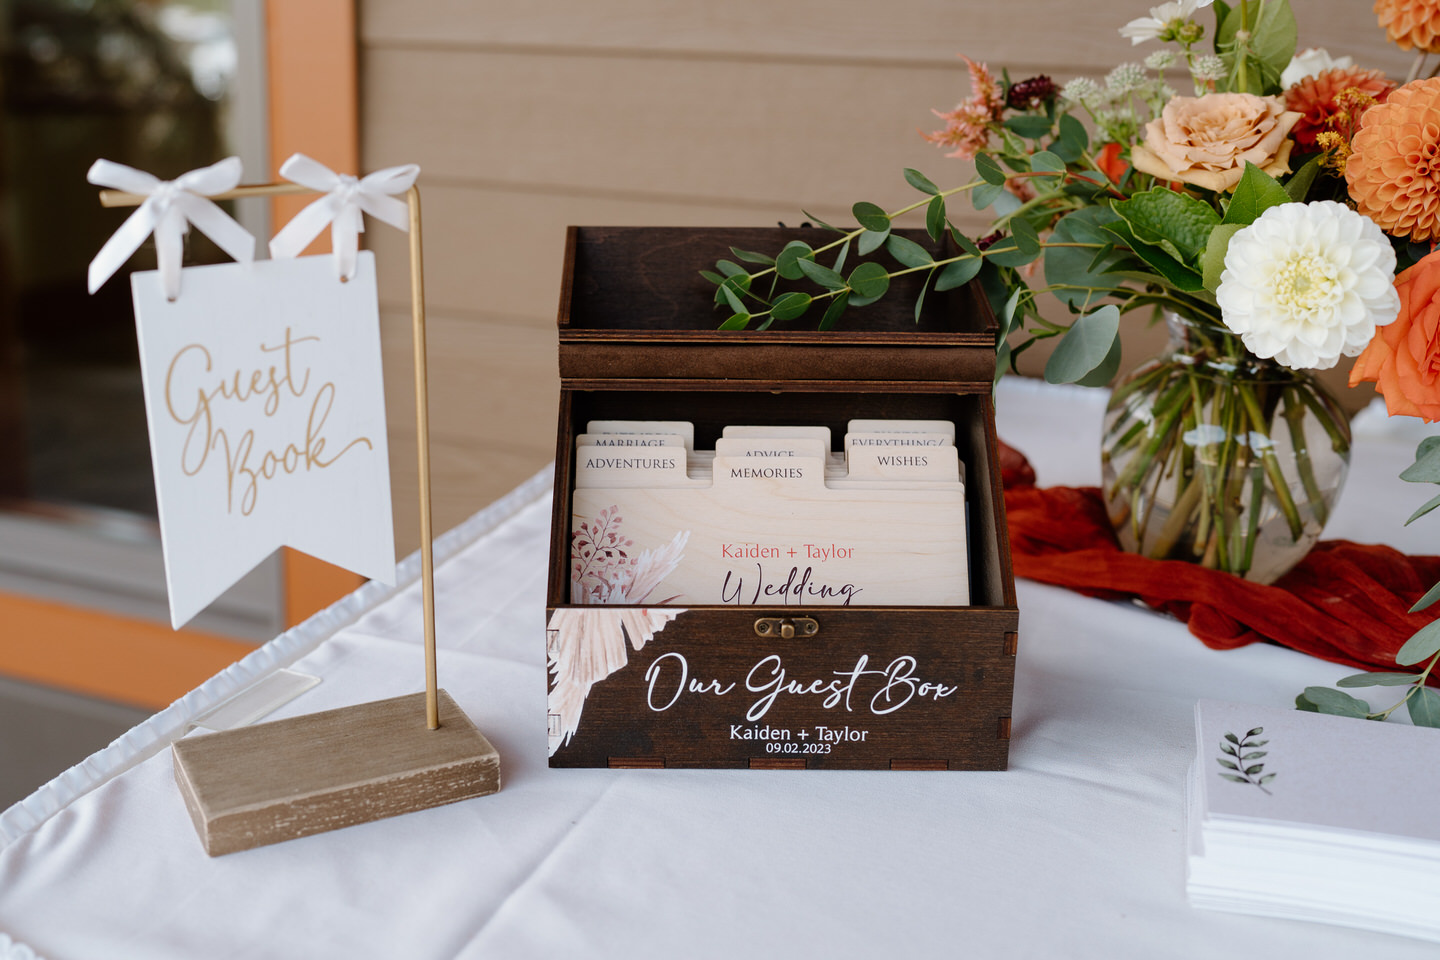 Wedding decor on entry table with guest book